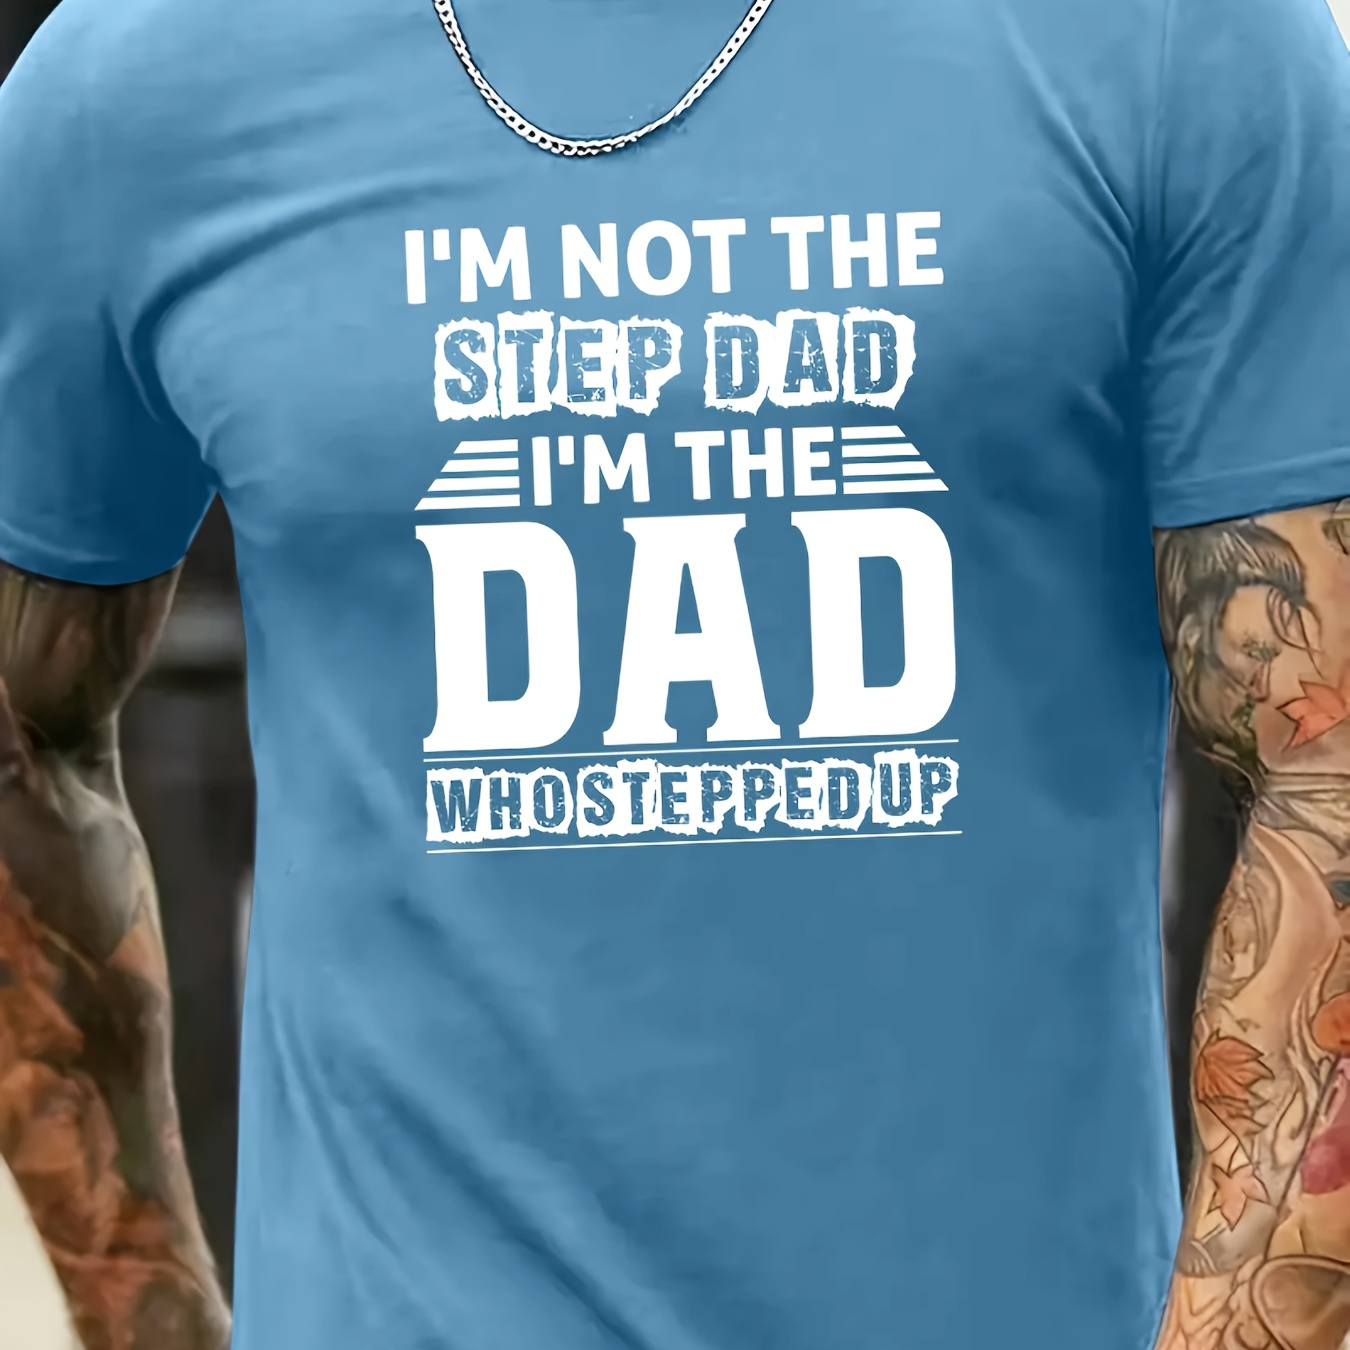 

Father's Day Dad Print Men's Short Sleeve T-shirts, Comfy Casual Breathable Tops For Men's Fitness Training, Jogging, Outdoor Activities Summer